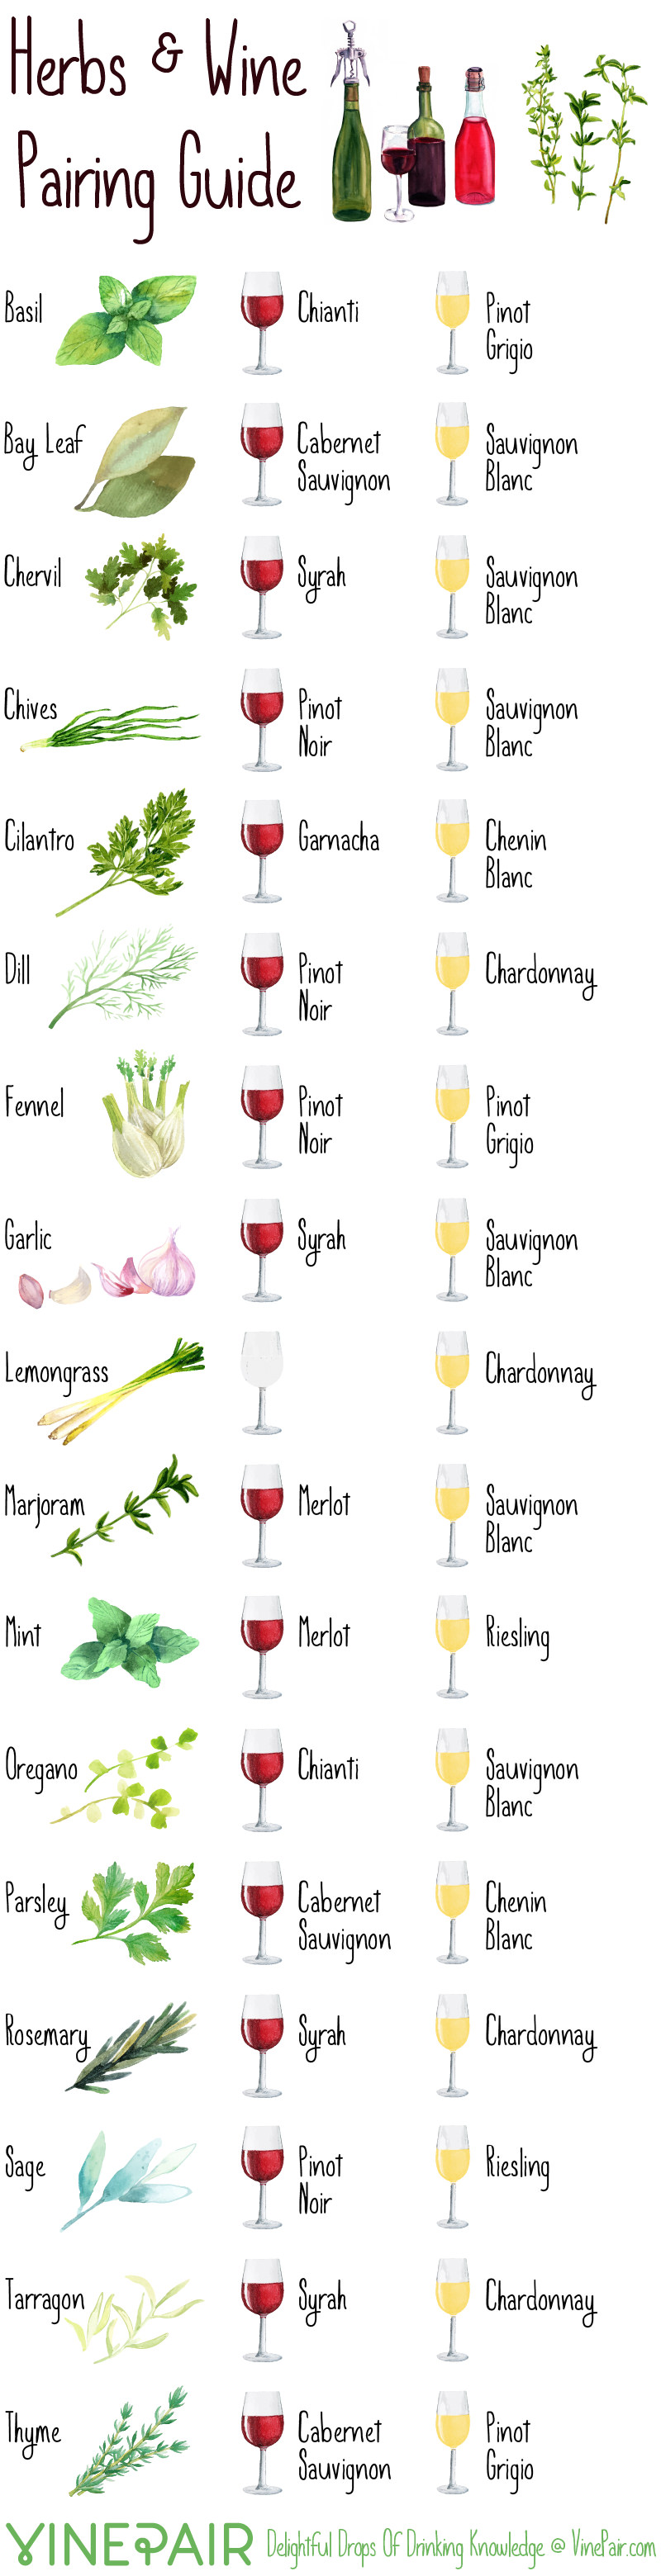 The Guide To Pairing Herbs And Wine by VinePair